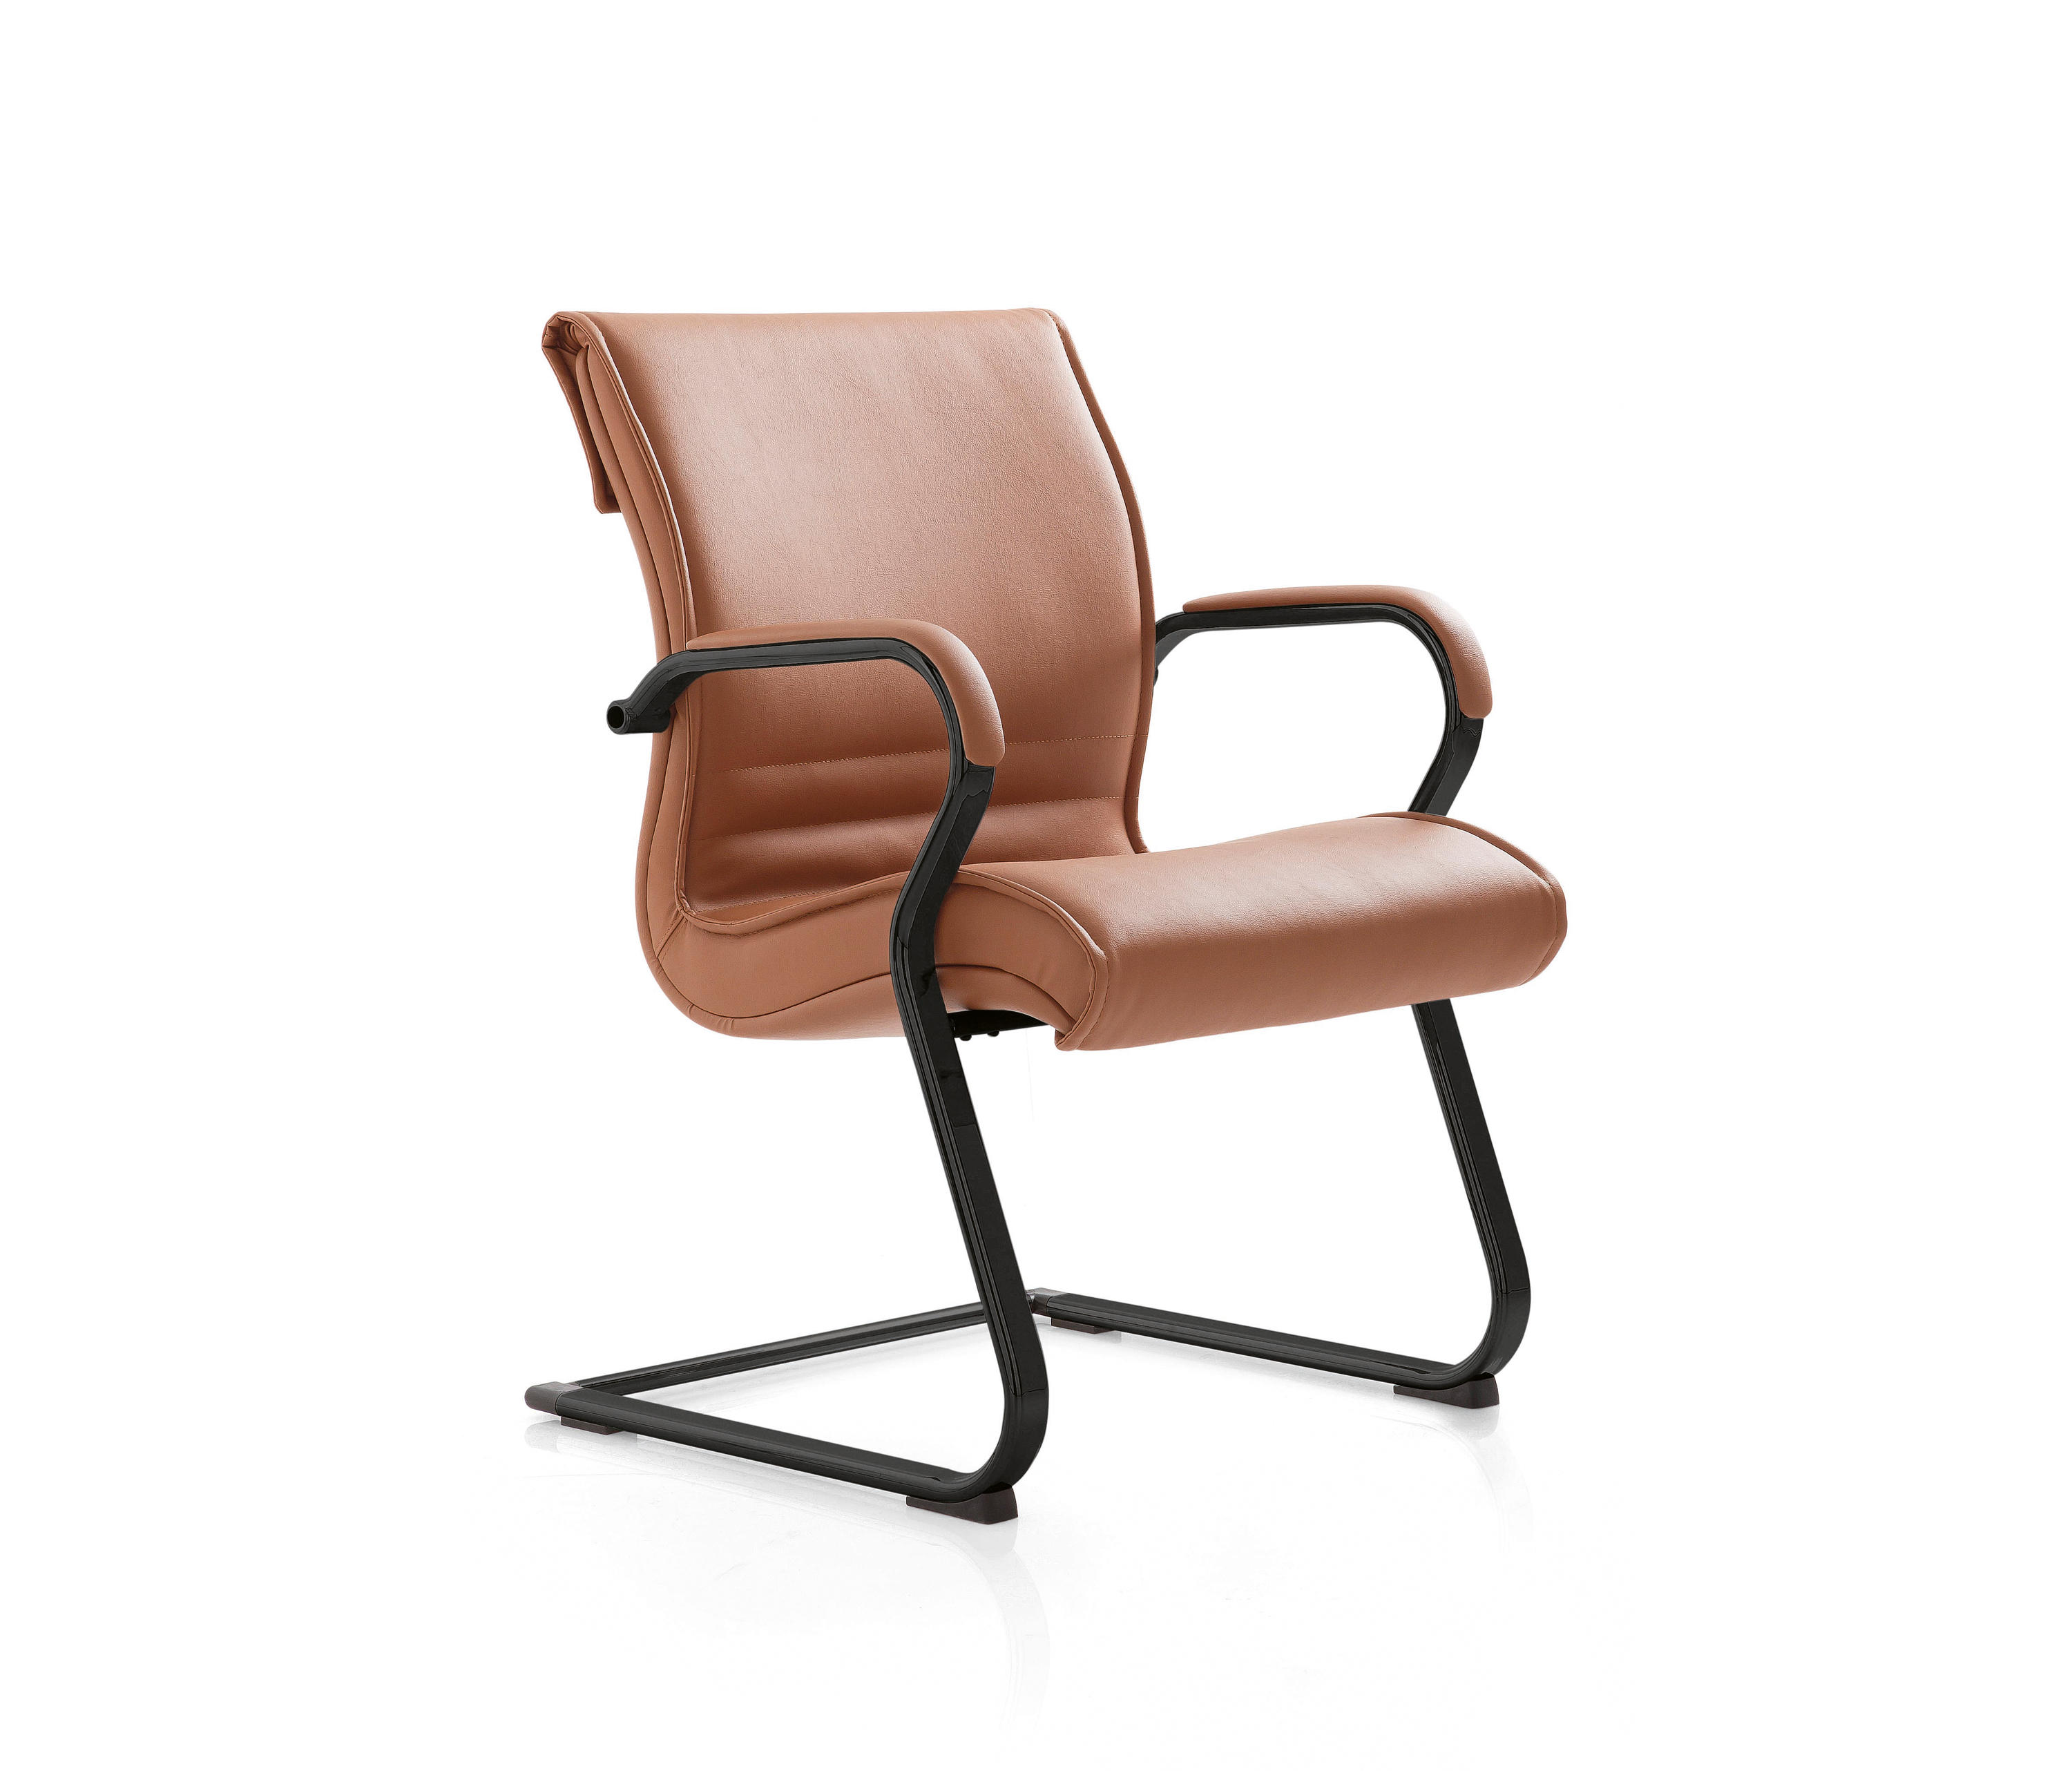 PULCHRA - Chairs from Emmegi | Architonic